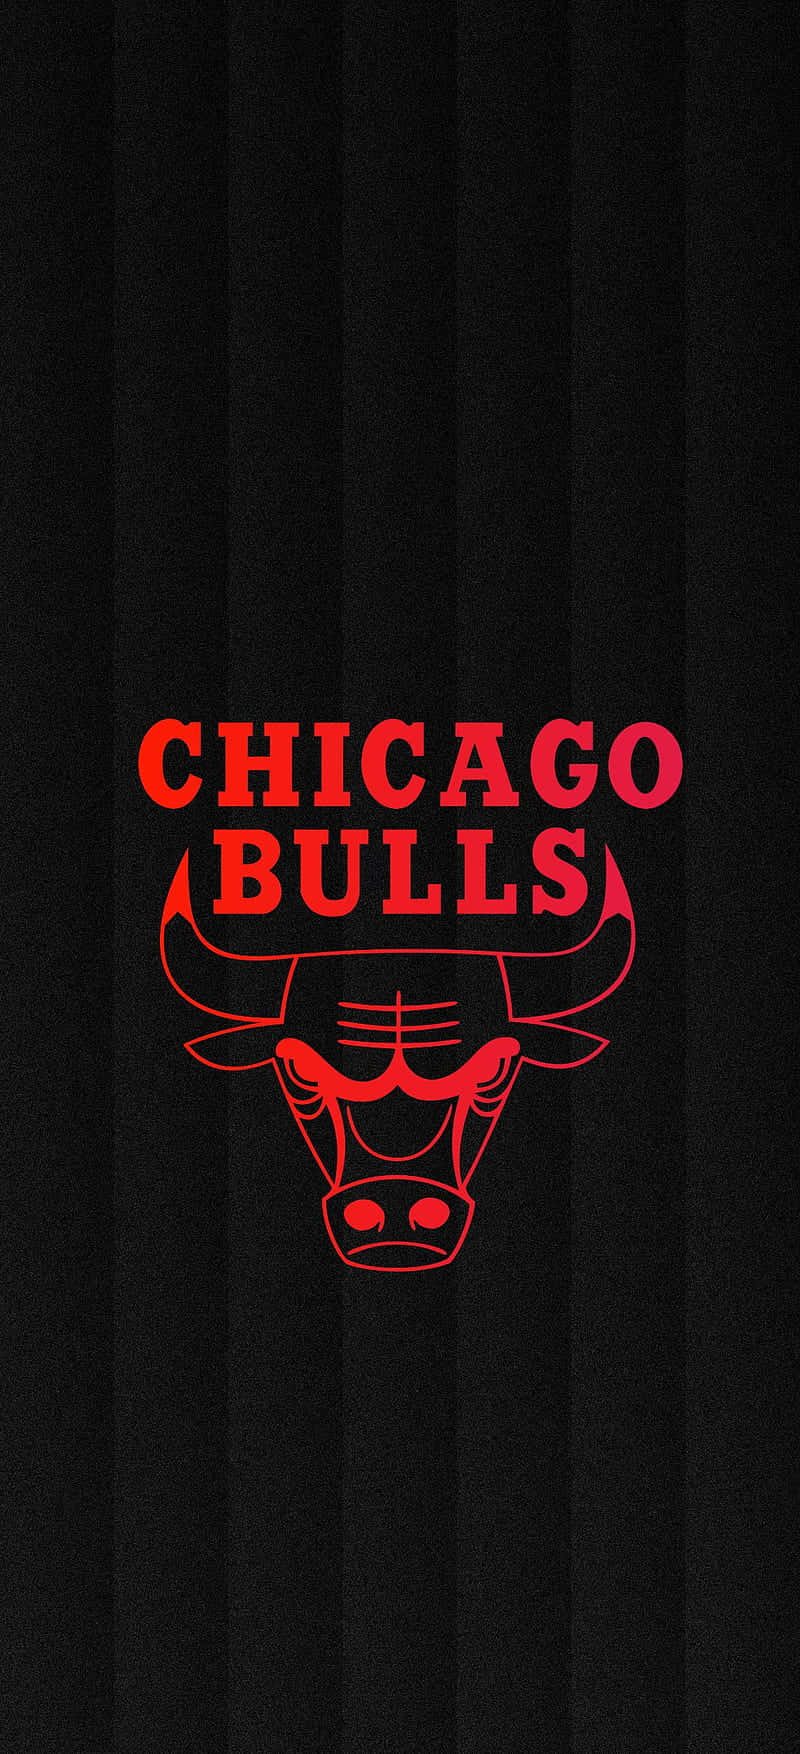 Get ready to cheer on the Chicago Bulls with this glorious phone wallpaper! Wallpaper